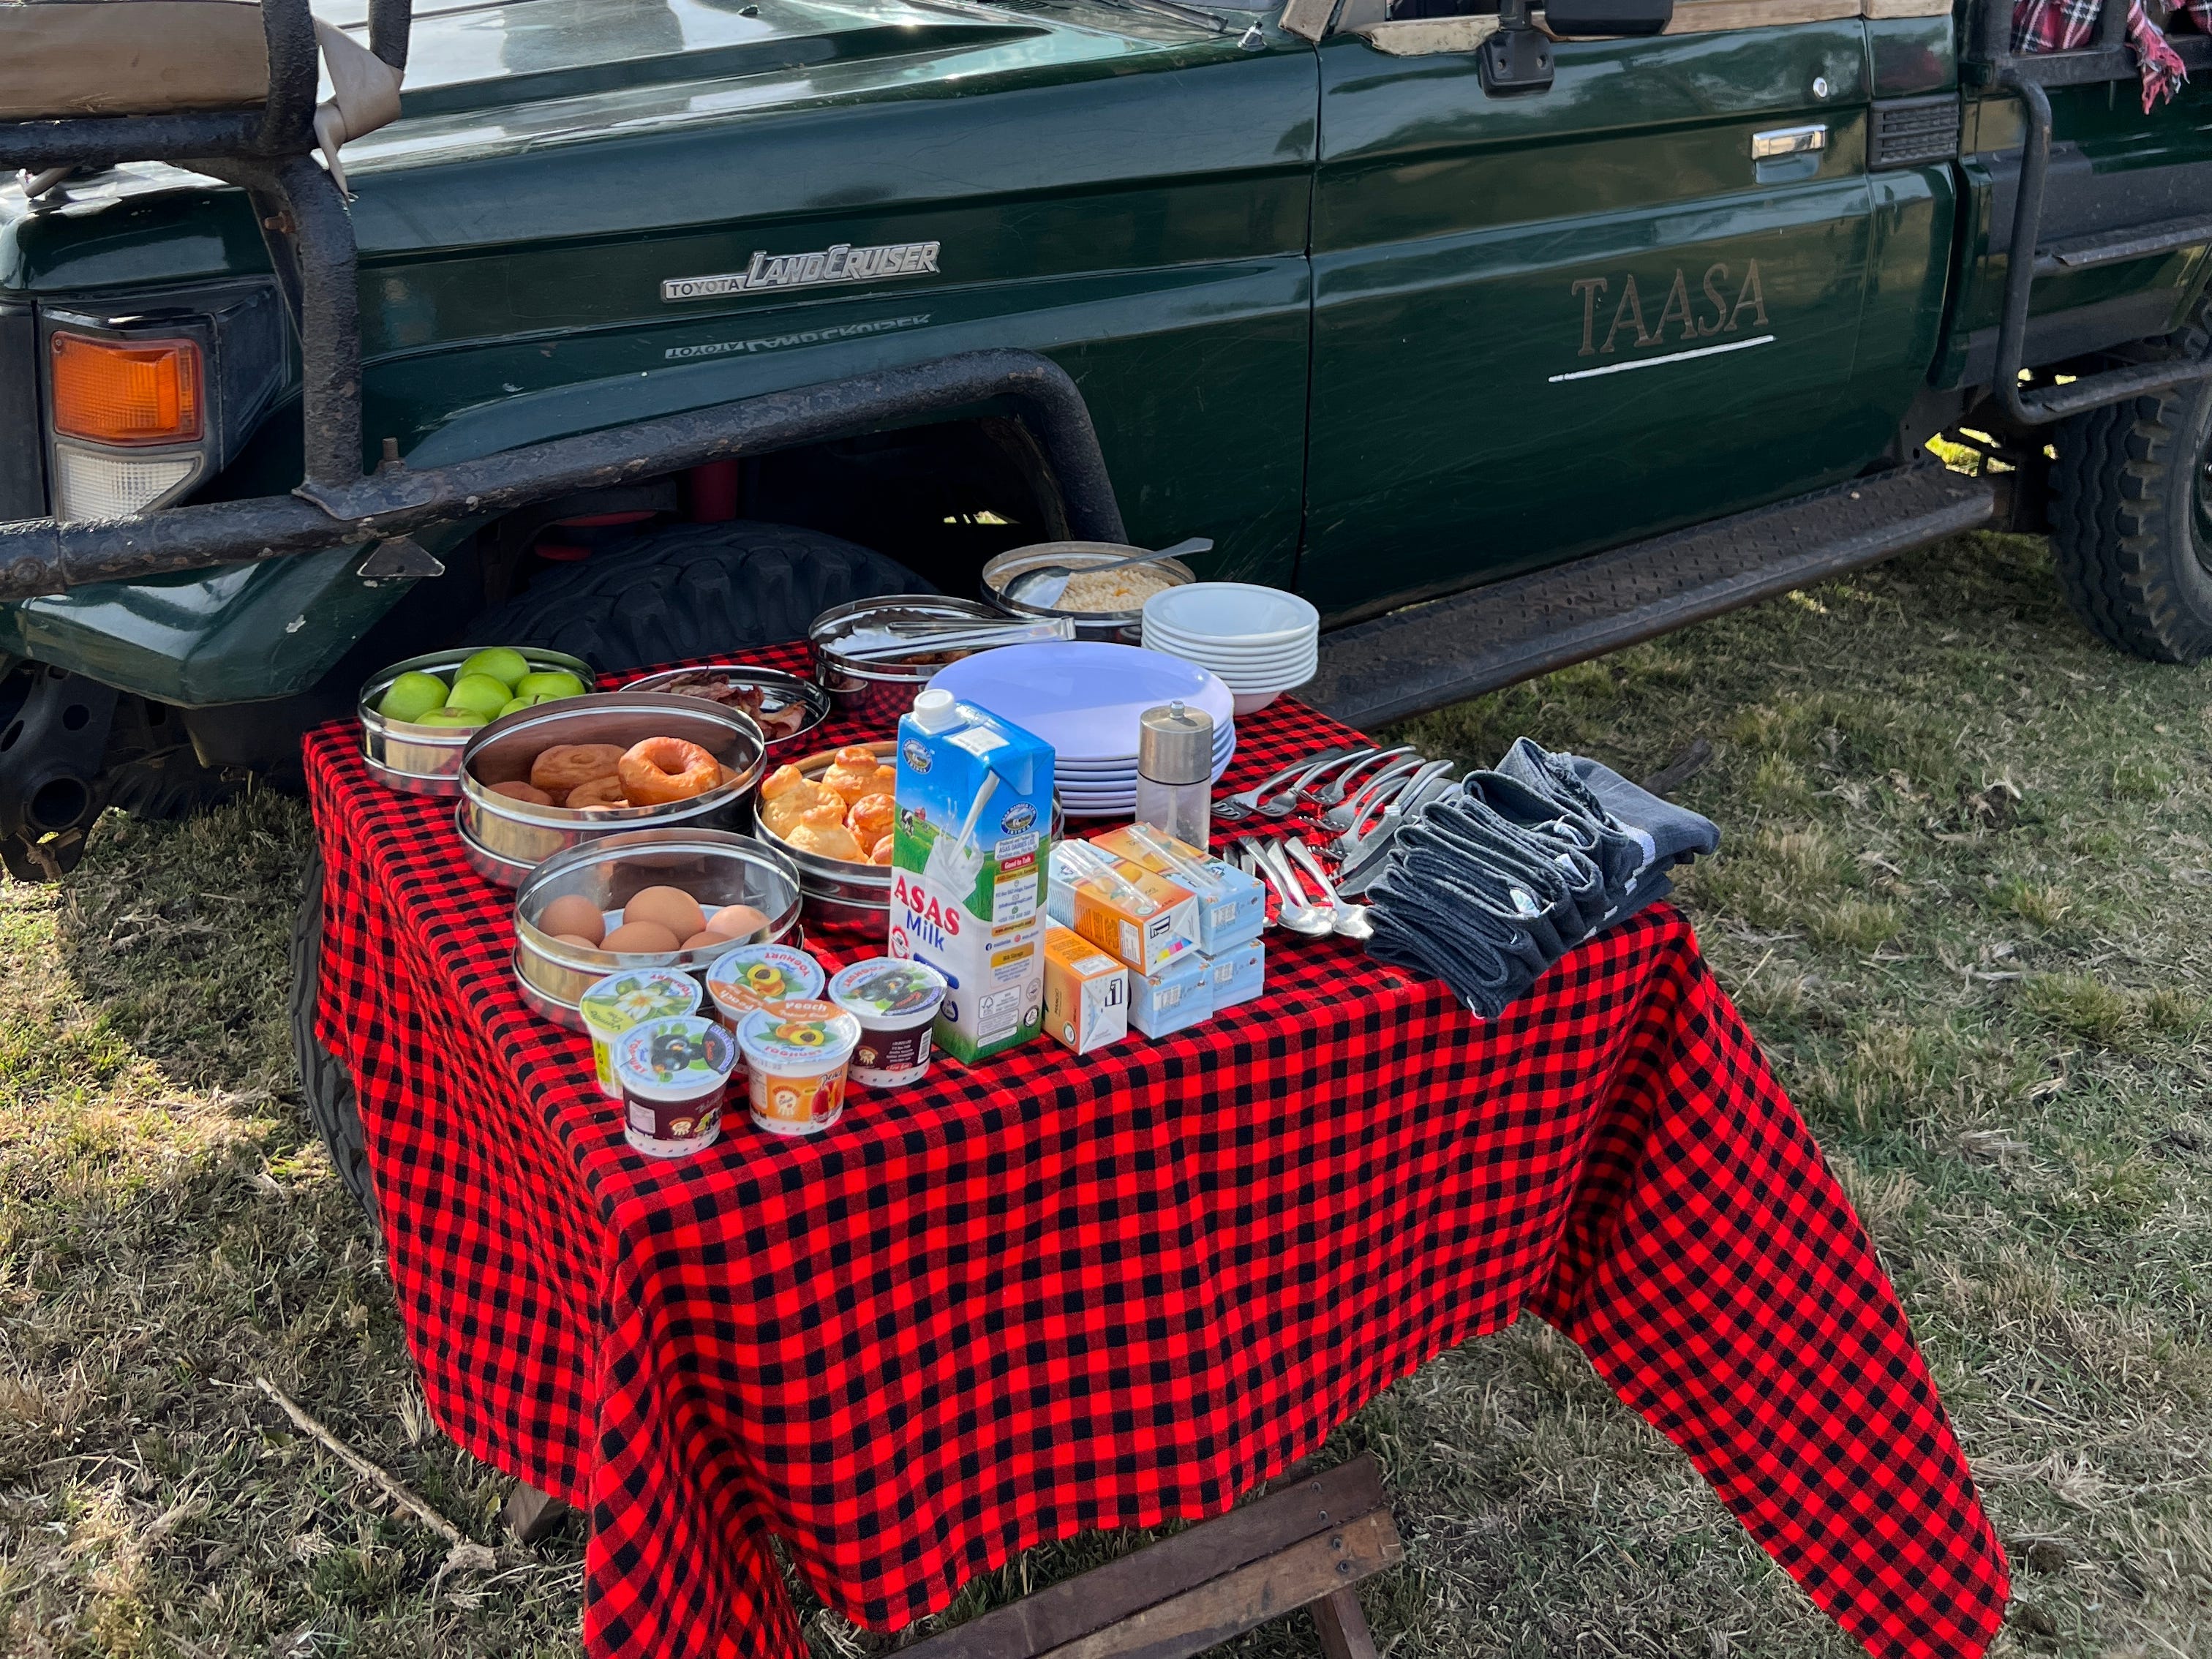 <p>Safari breakfasts consisted of hard-boiled eggs, yogurt, doughnuts, bacon and sausage, fruits, and orange juice. Staff also made French-press coffee, which we could spike with cream liqueur.</p><p>Our Land Cruiser had a cooler of beers and sodas in the back, too.</p>